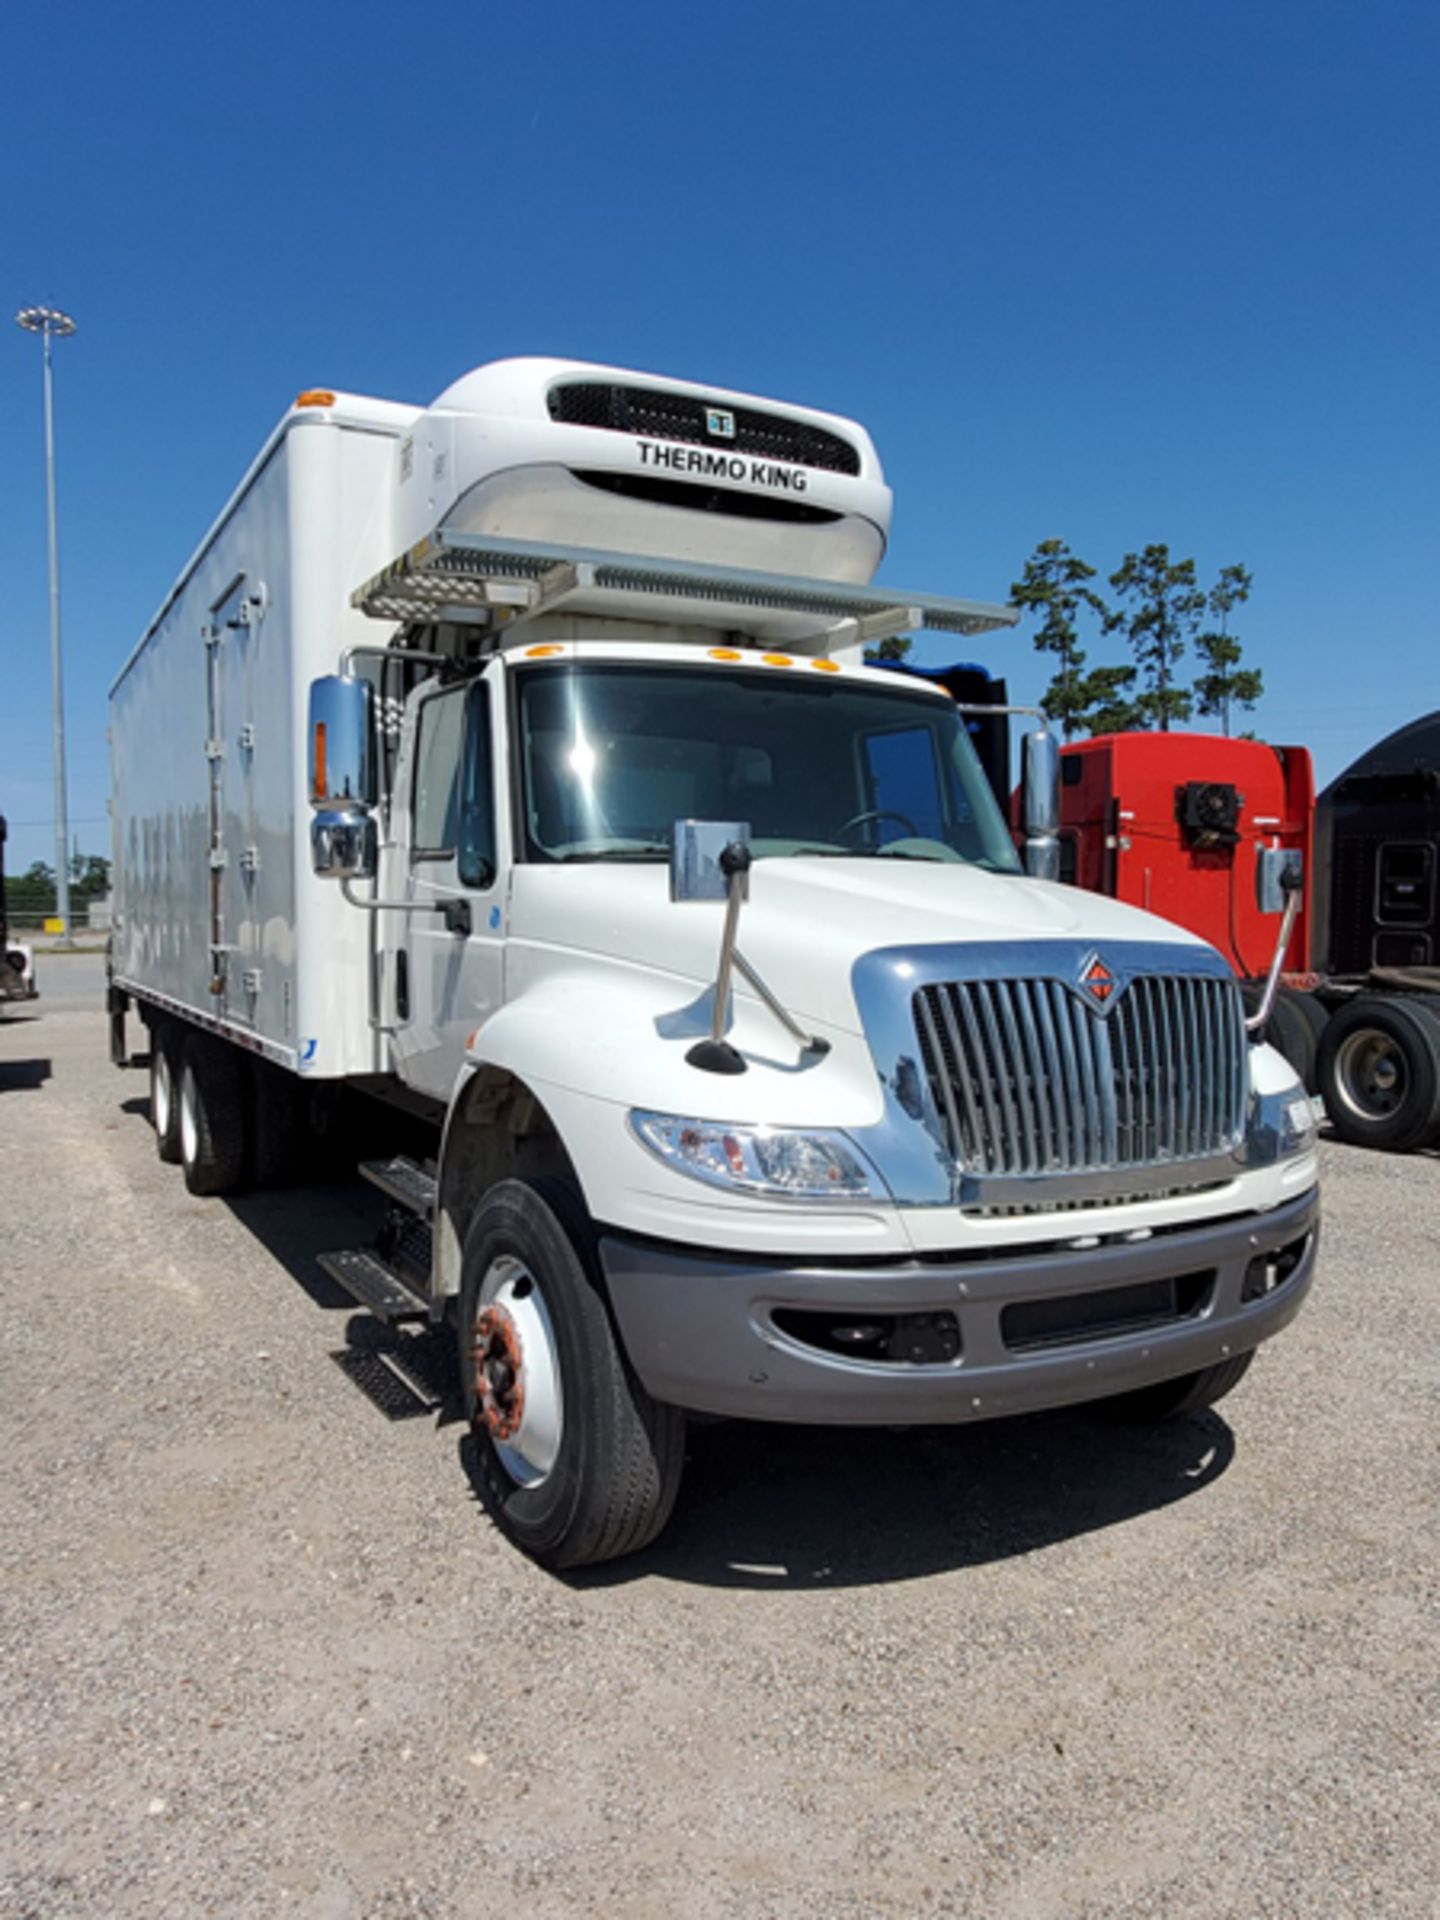 2018 INTERNATIONAL 4400 SBA 6X4 REFRIGERATED BOX TRUCK VIN#: 1HTMSTAR5JH529833, Approx Miles: 26232, - Image 2 of 9